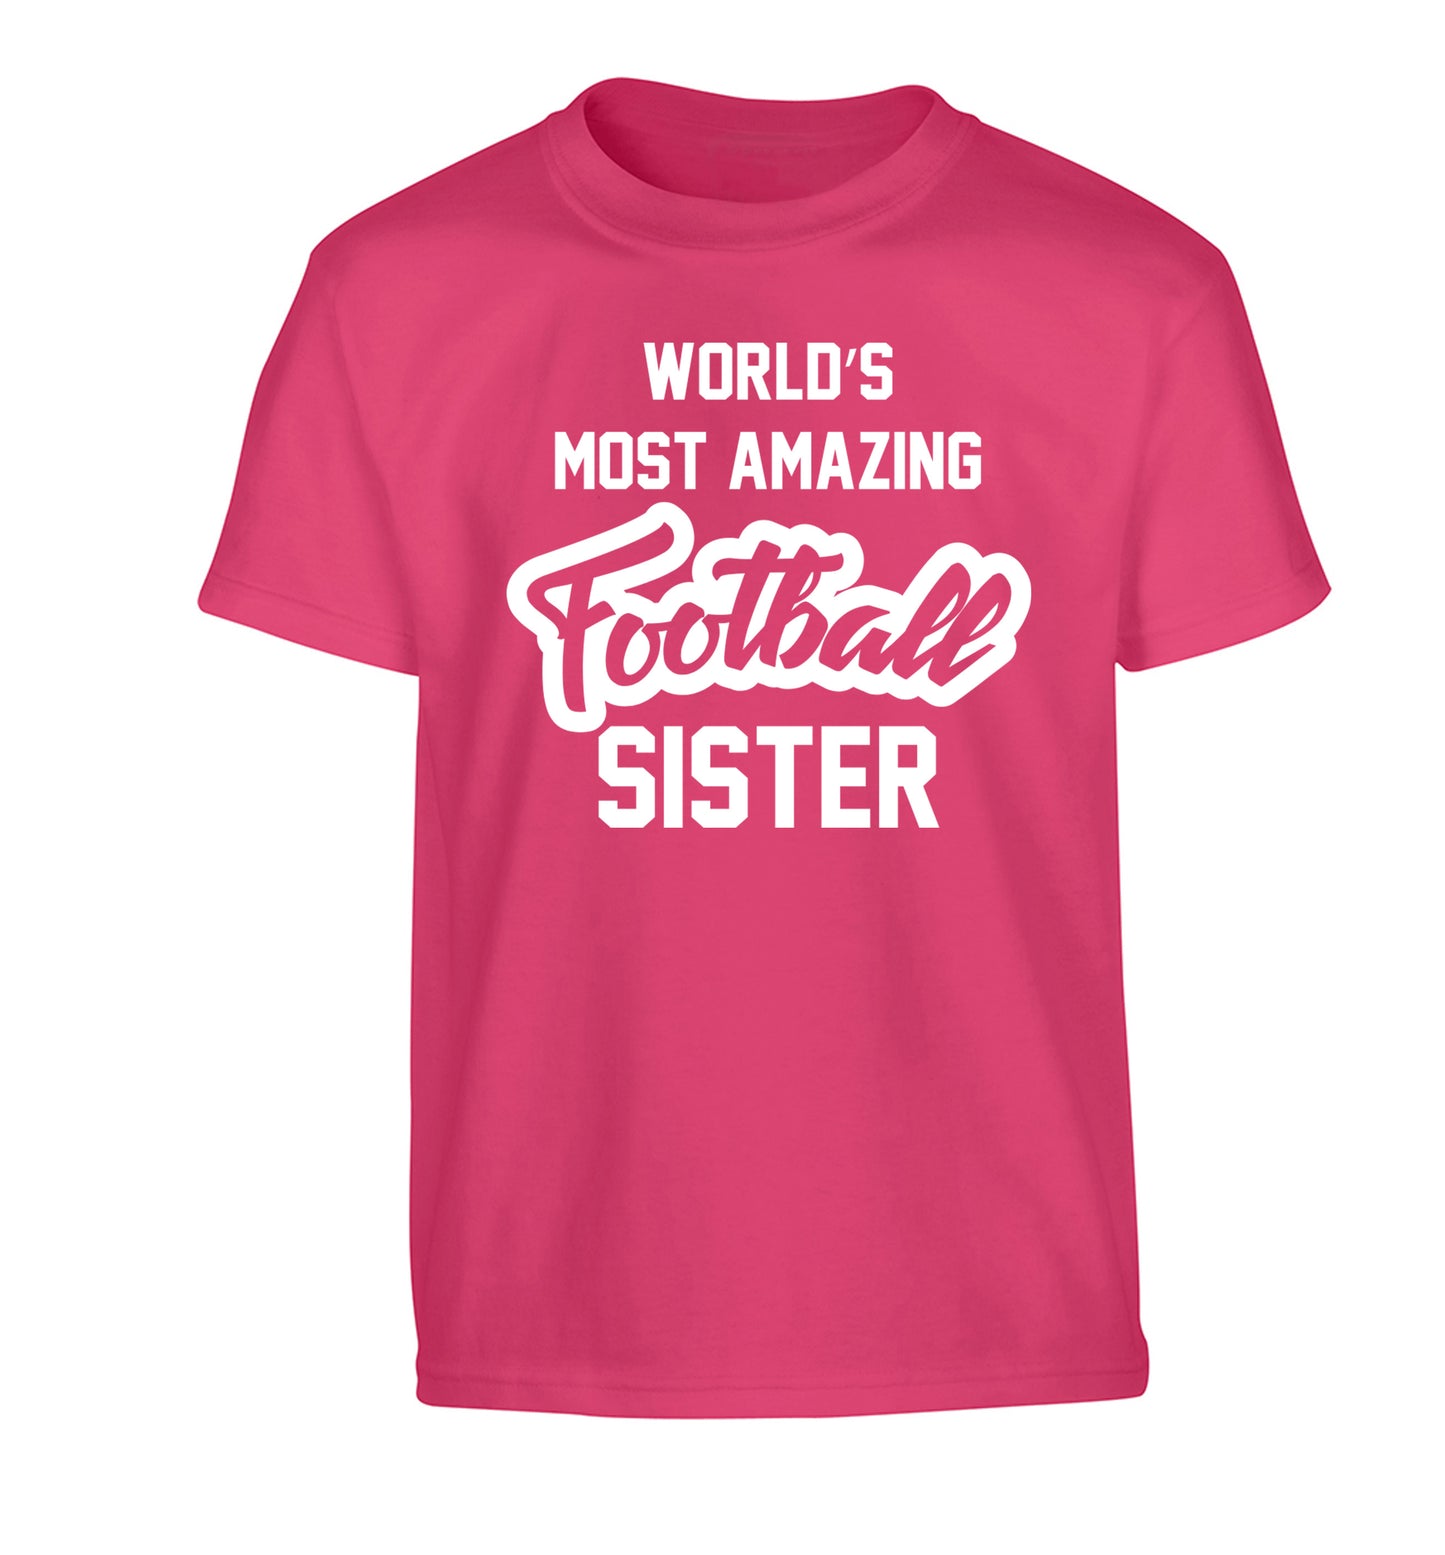 Worlds most amazing football sister Children's pink Tshirt 12-14 Years